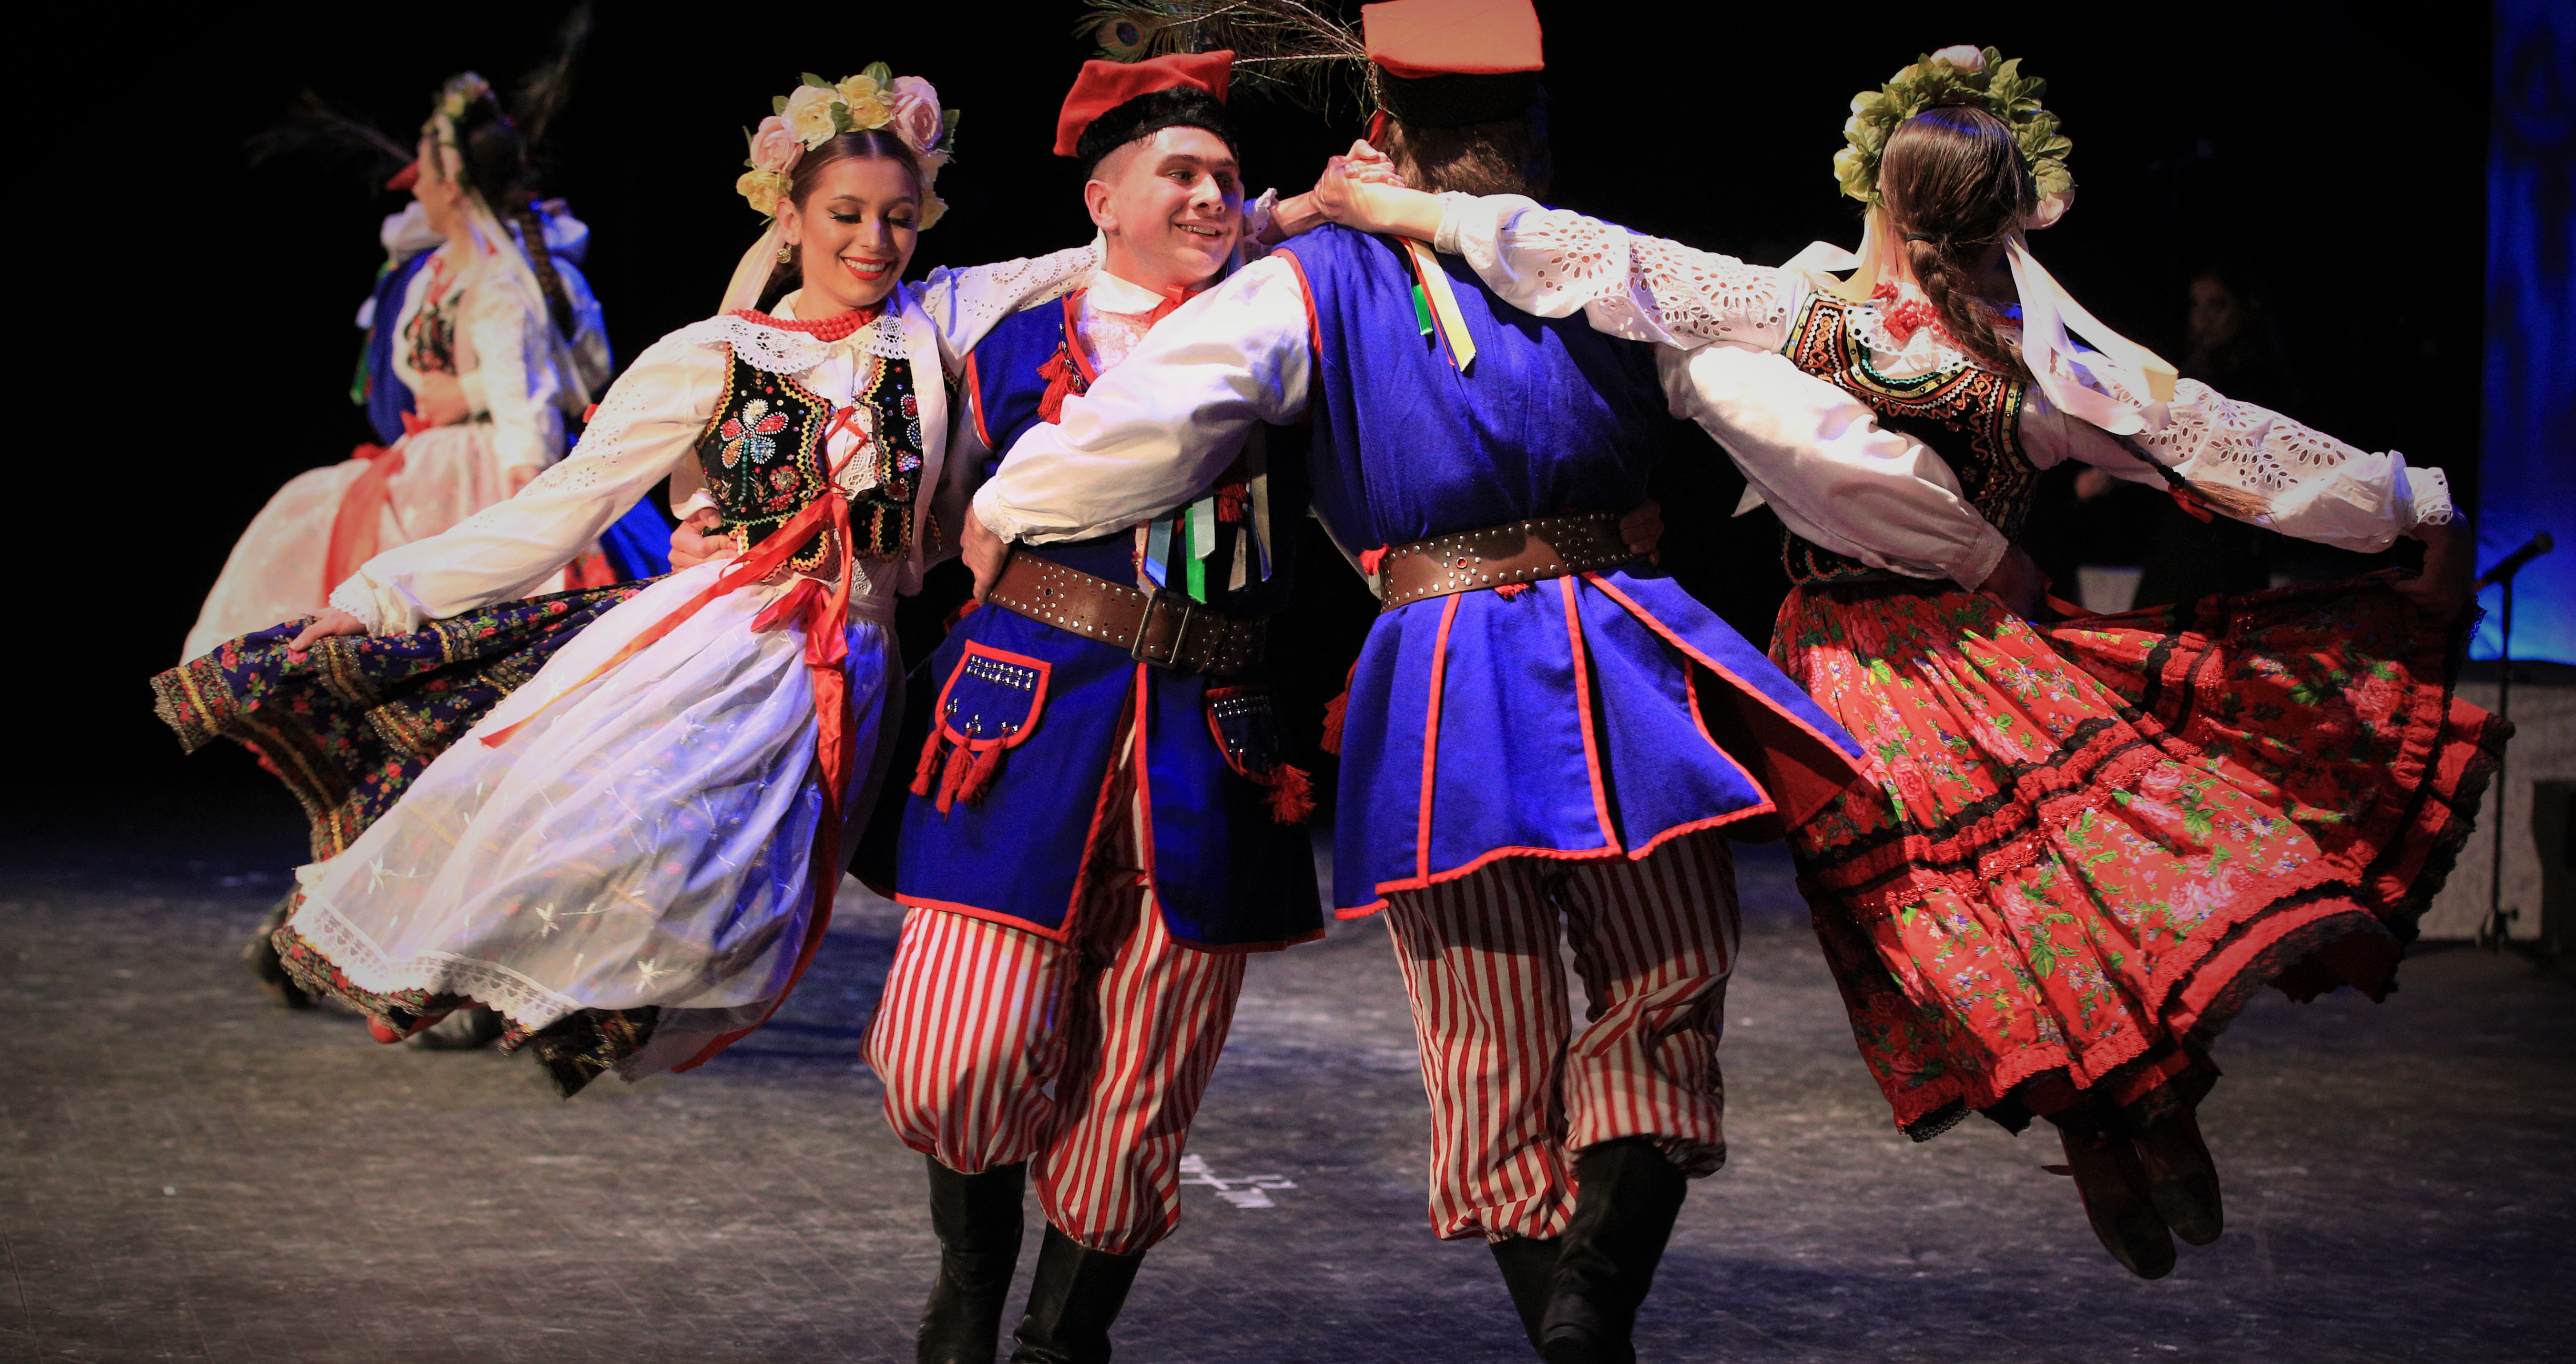 Lively Polish dancers spinning to the sounds of the Kraków region.